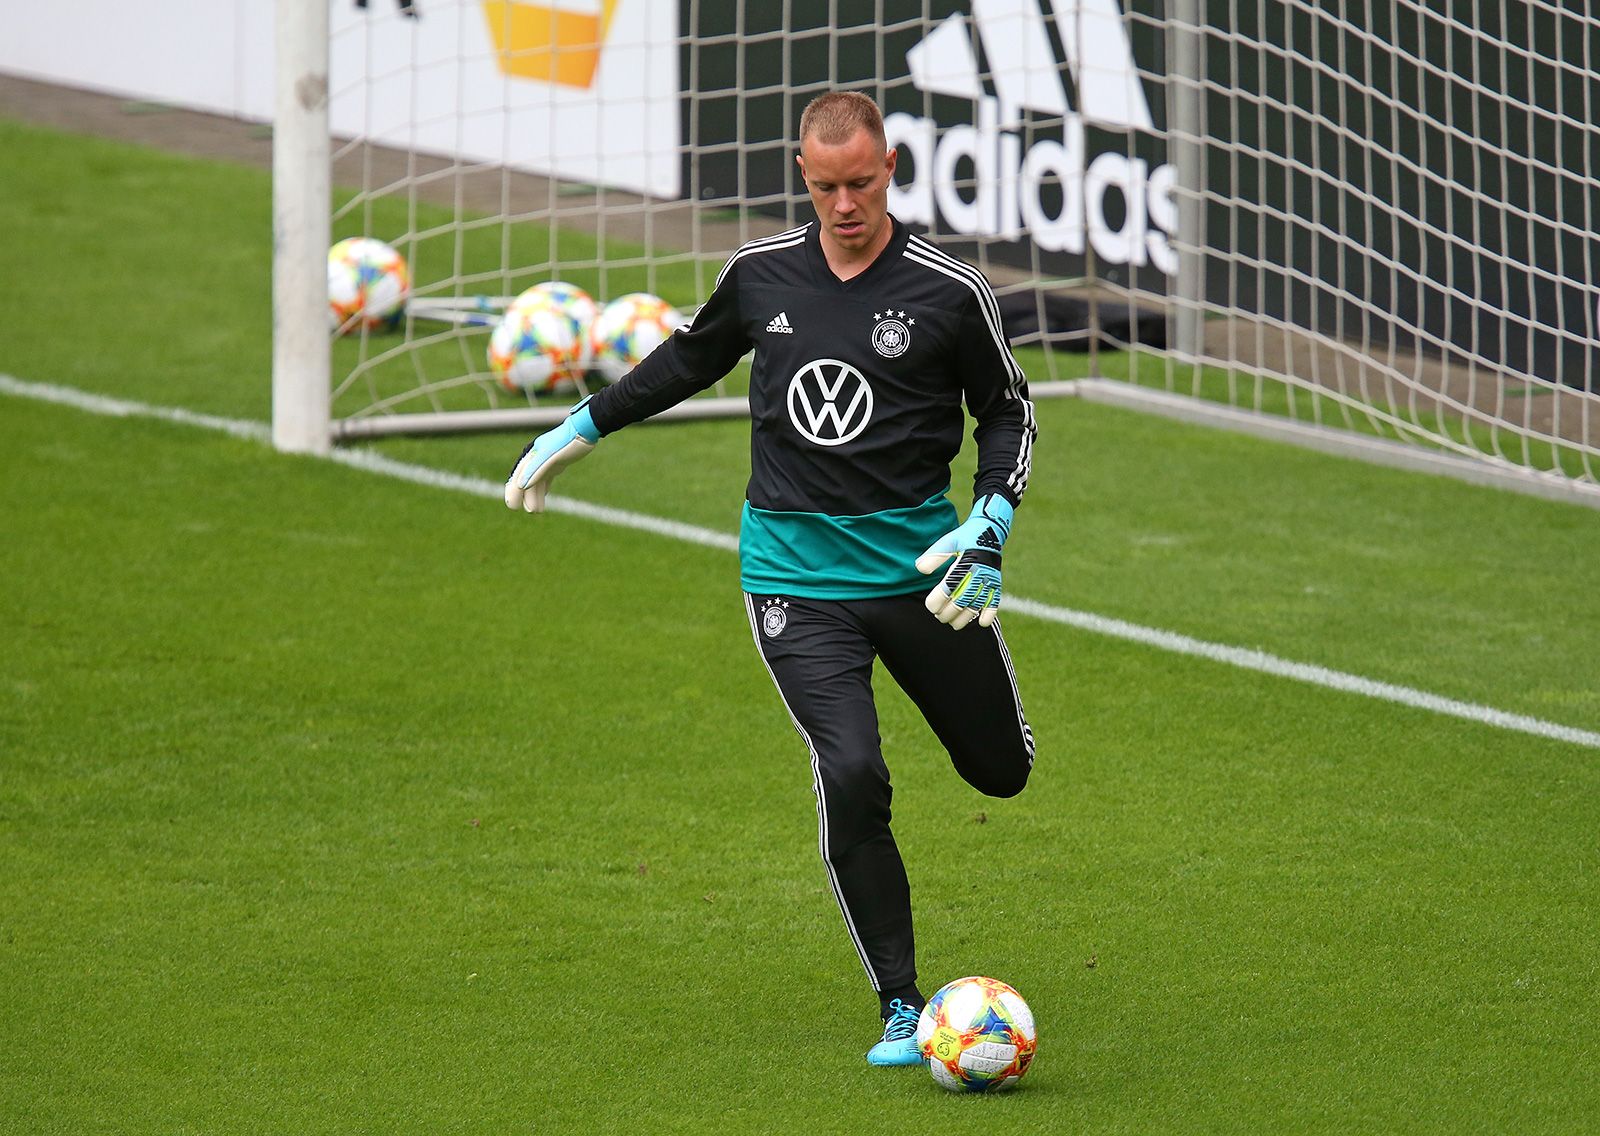 Ter Stegen In a training with Germany